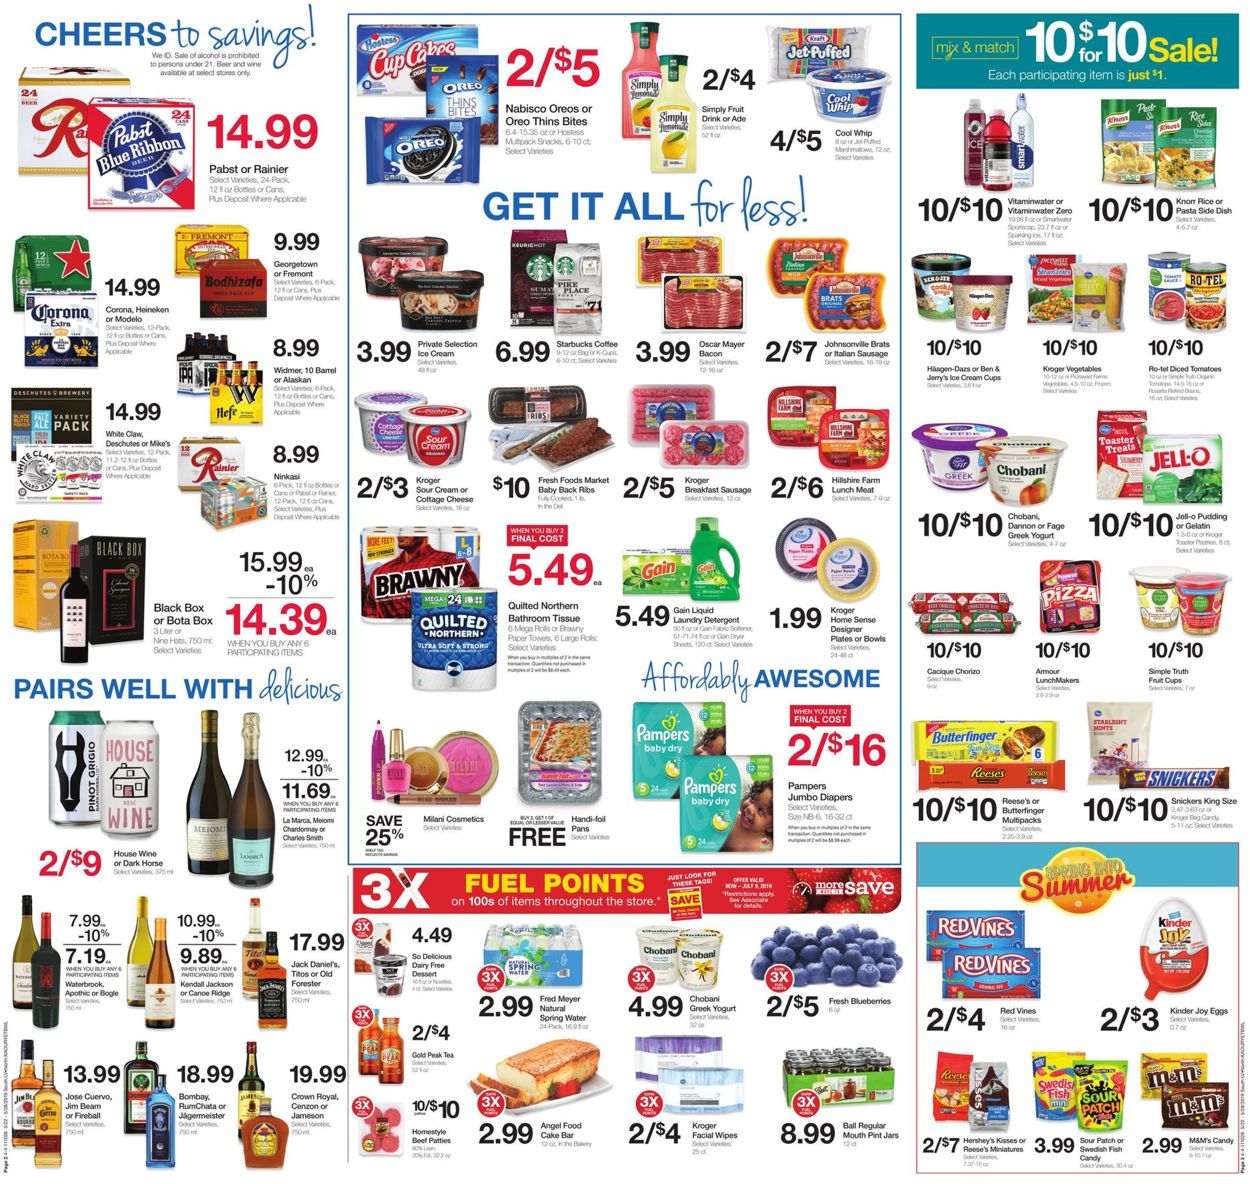 Fred Meyer Current weekly ad 05/22 - 05/28/2019 [4] - frequent-ads.com